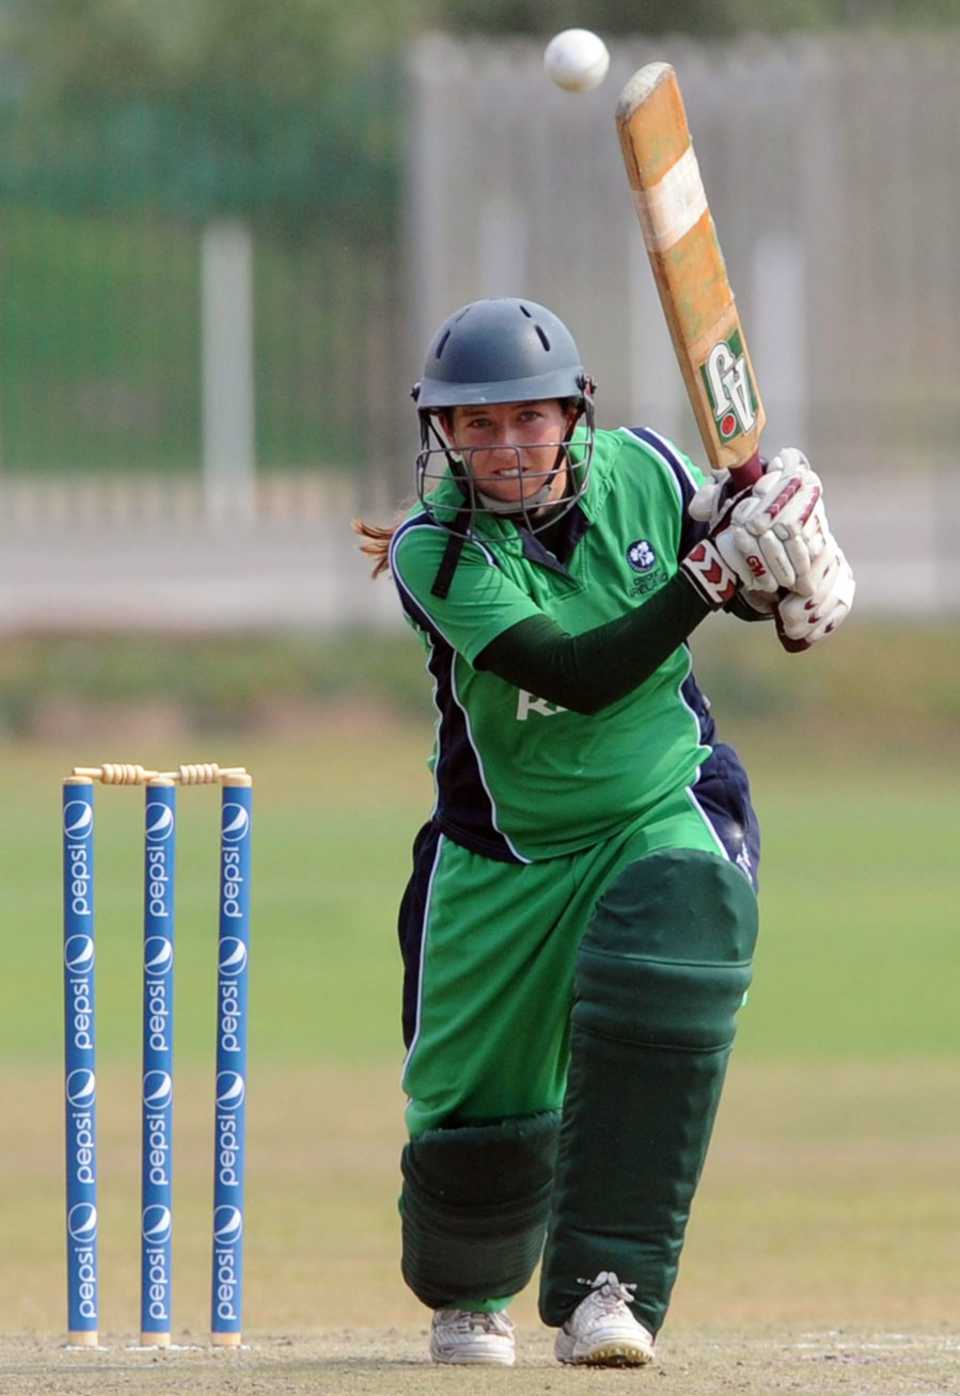 Ireland batsman Isobel Joyce drives through the off side during her innings of 63